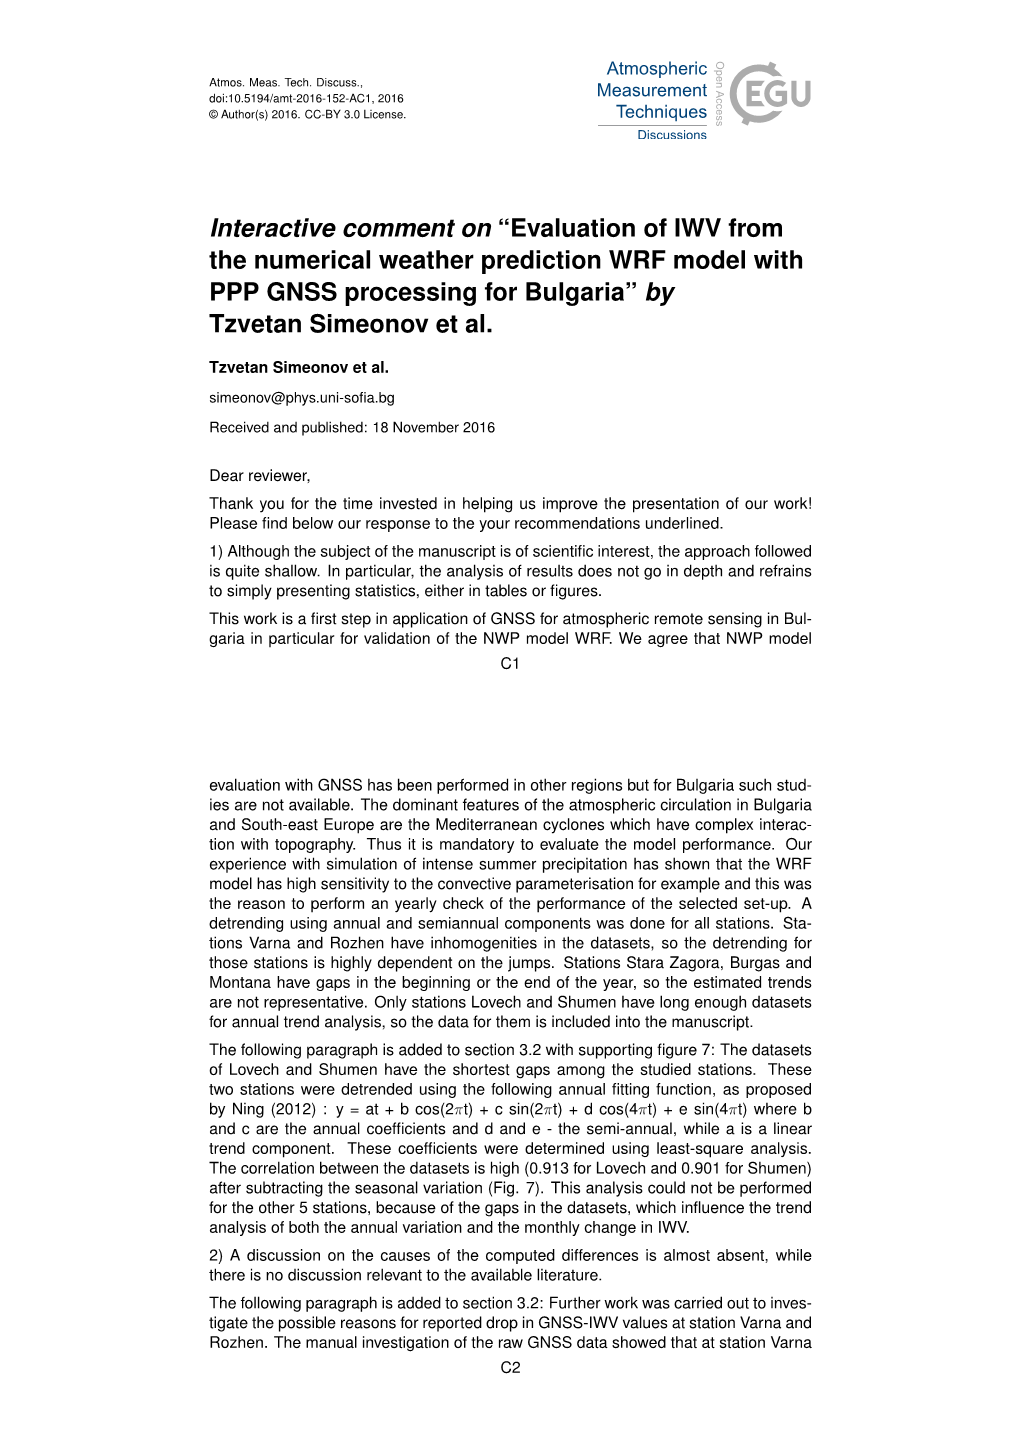 Evaluation of IWV from the Numerical Weather Prediction WRF Model with PPP GNSS Processing for Bulgaria” by Tzvetan Simeonov Et Al